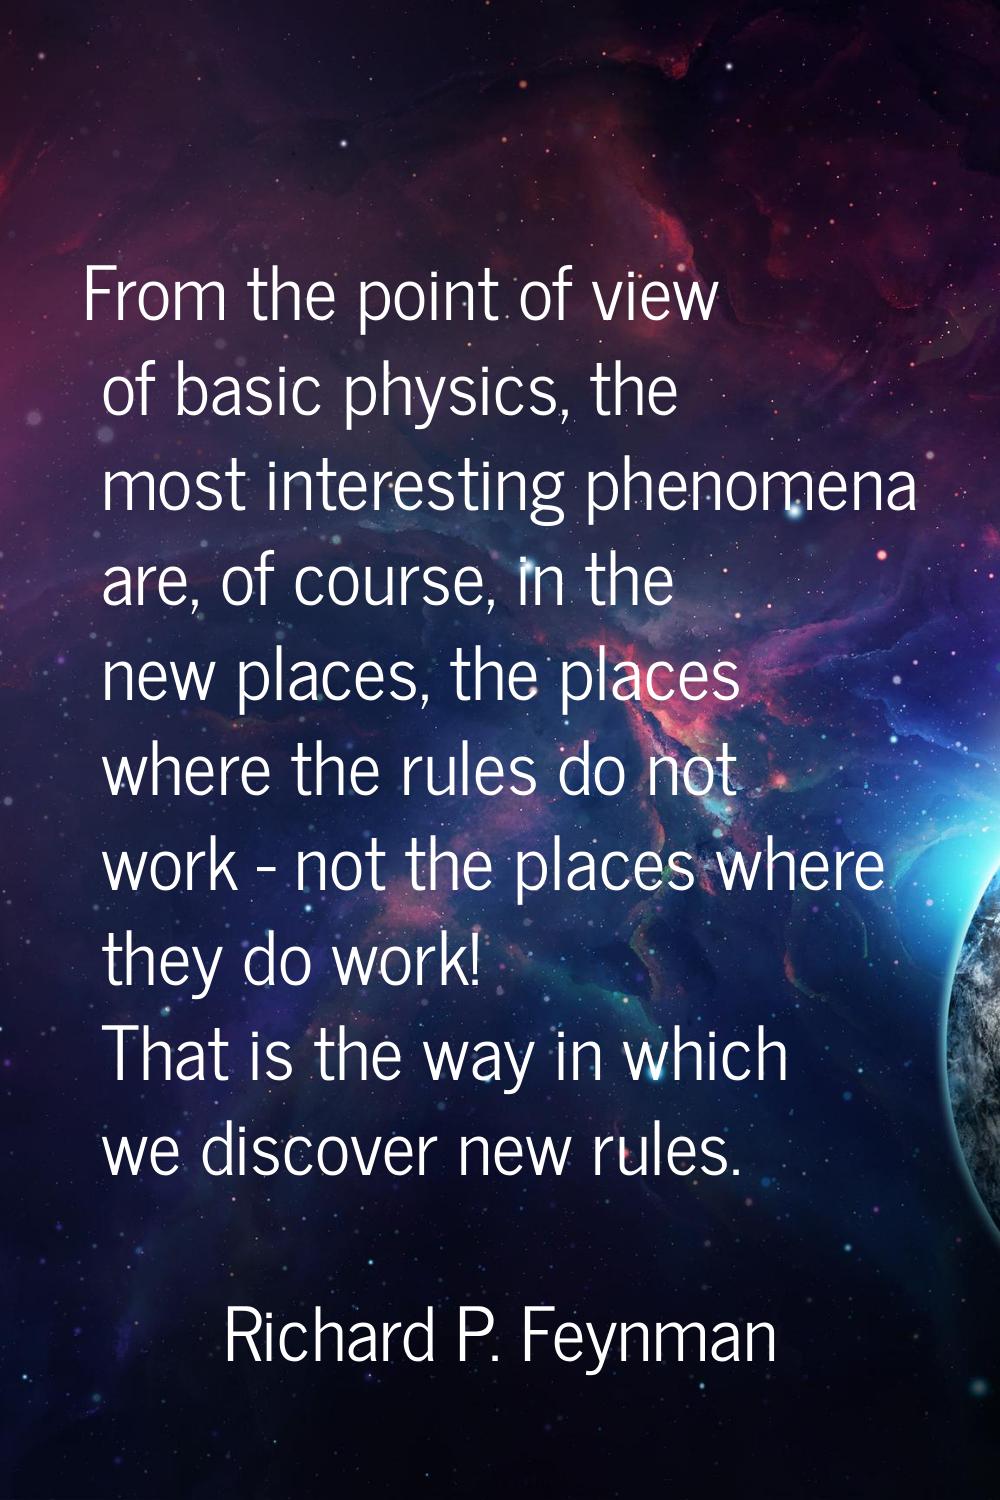 From the point of view of basic physics, the most interesting phenomena are, of course, in the new 